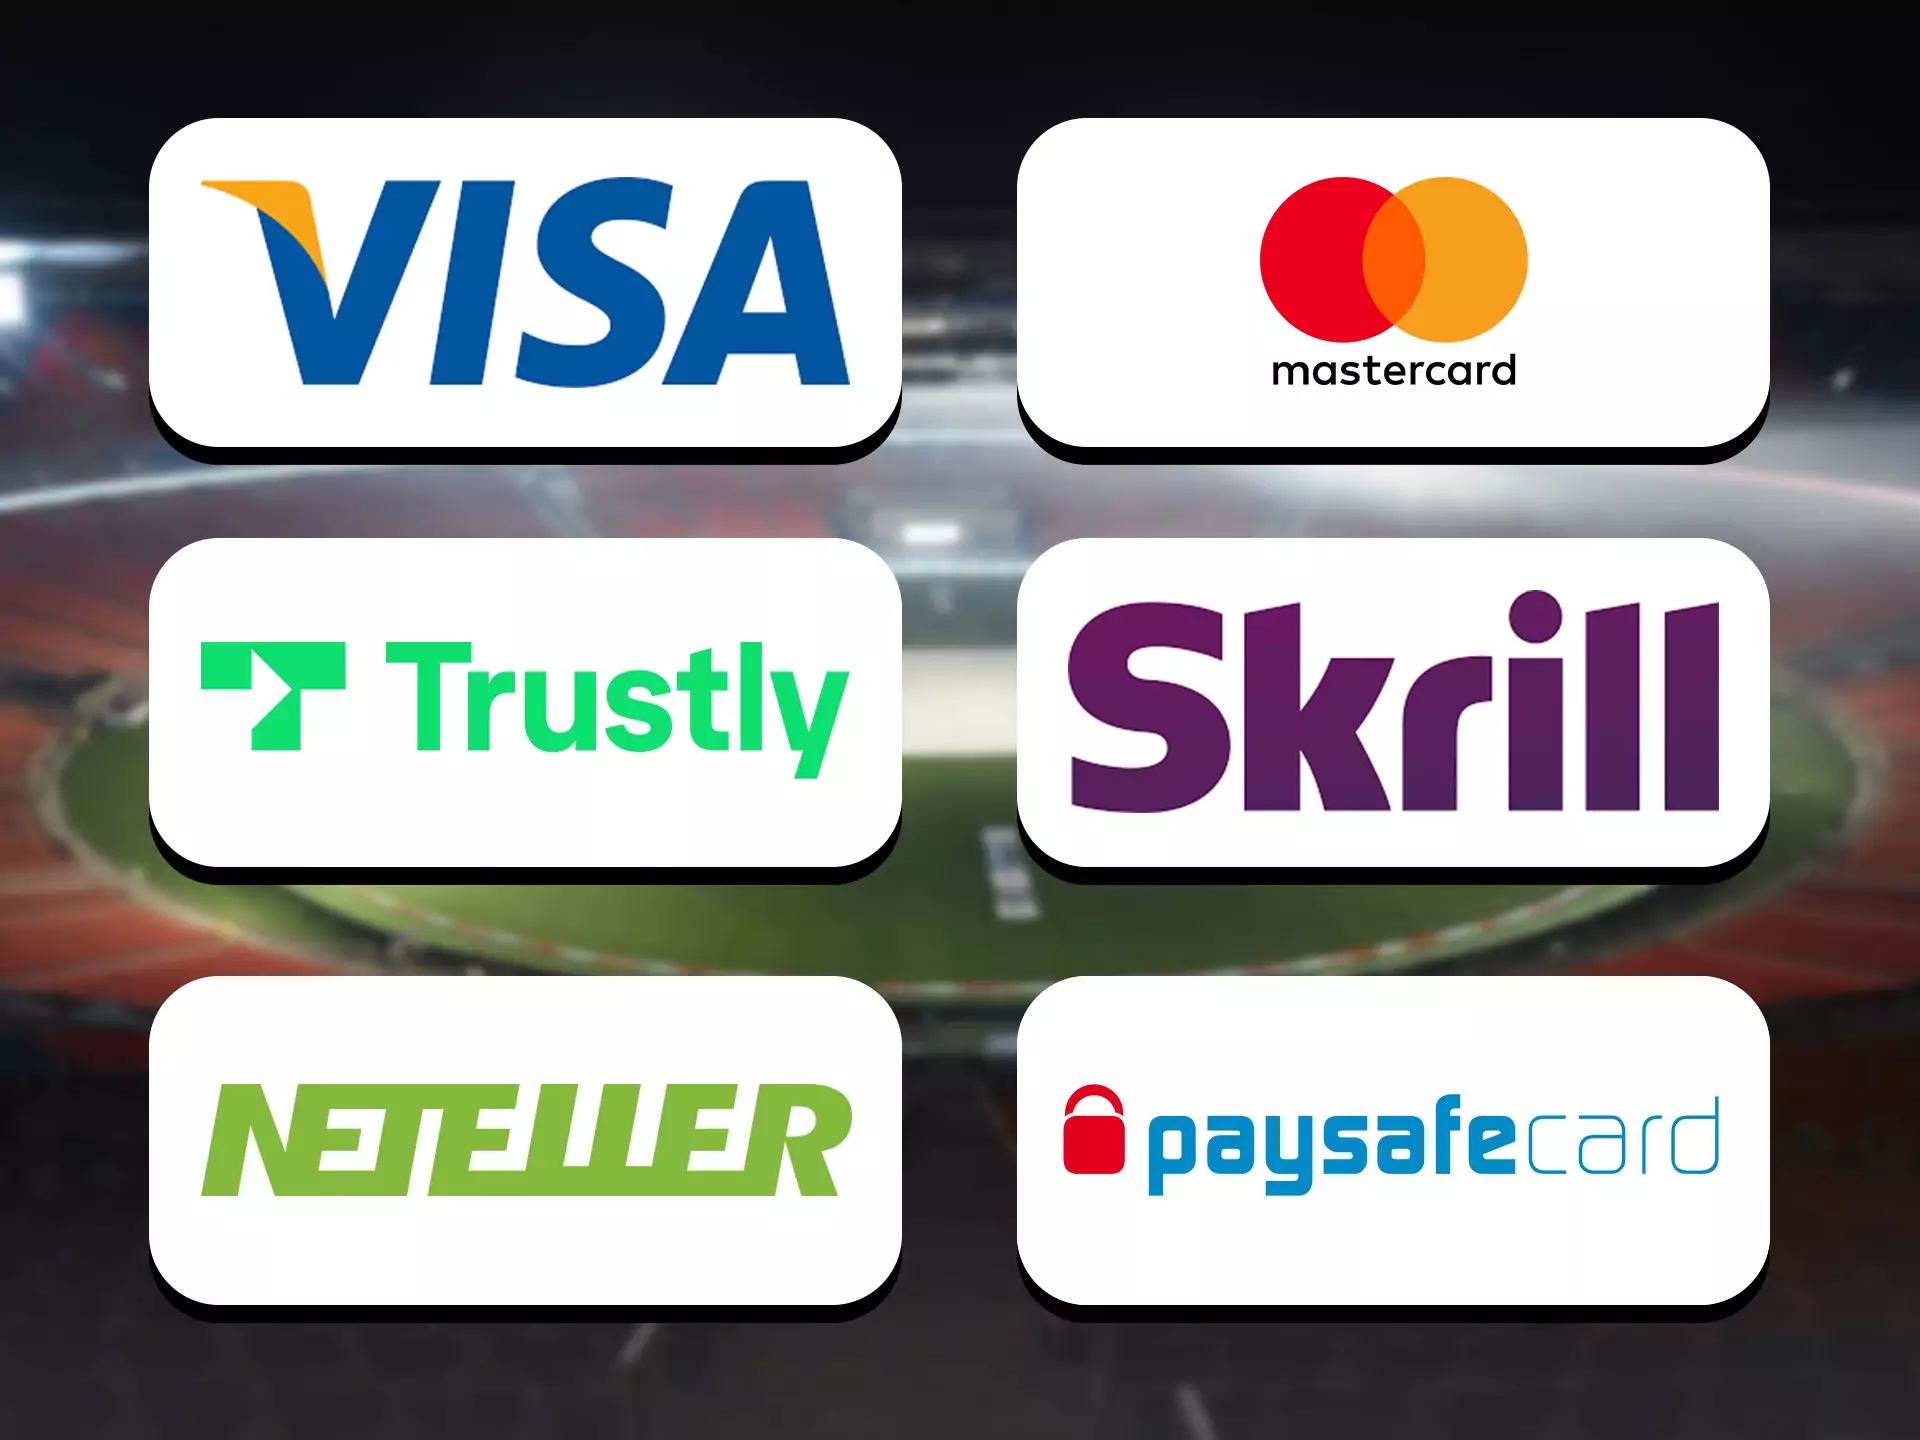 Popular payment methods are available to UK users.